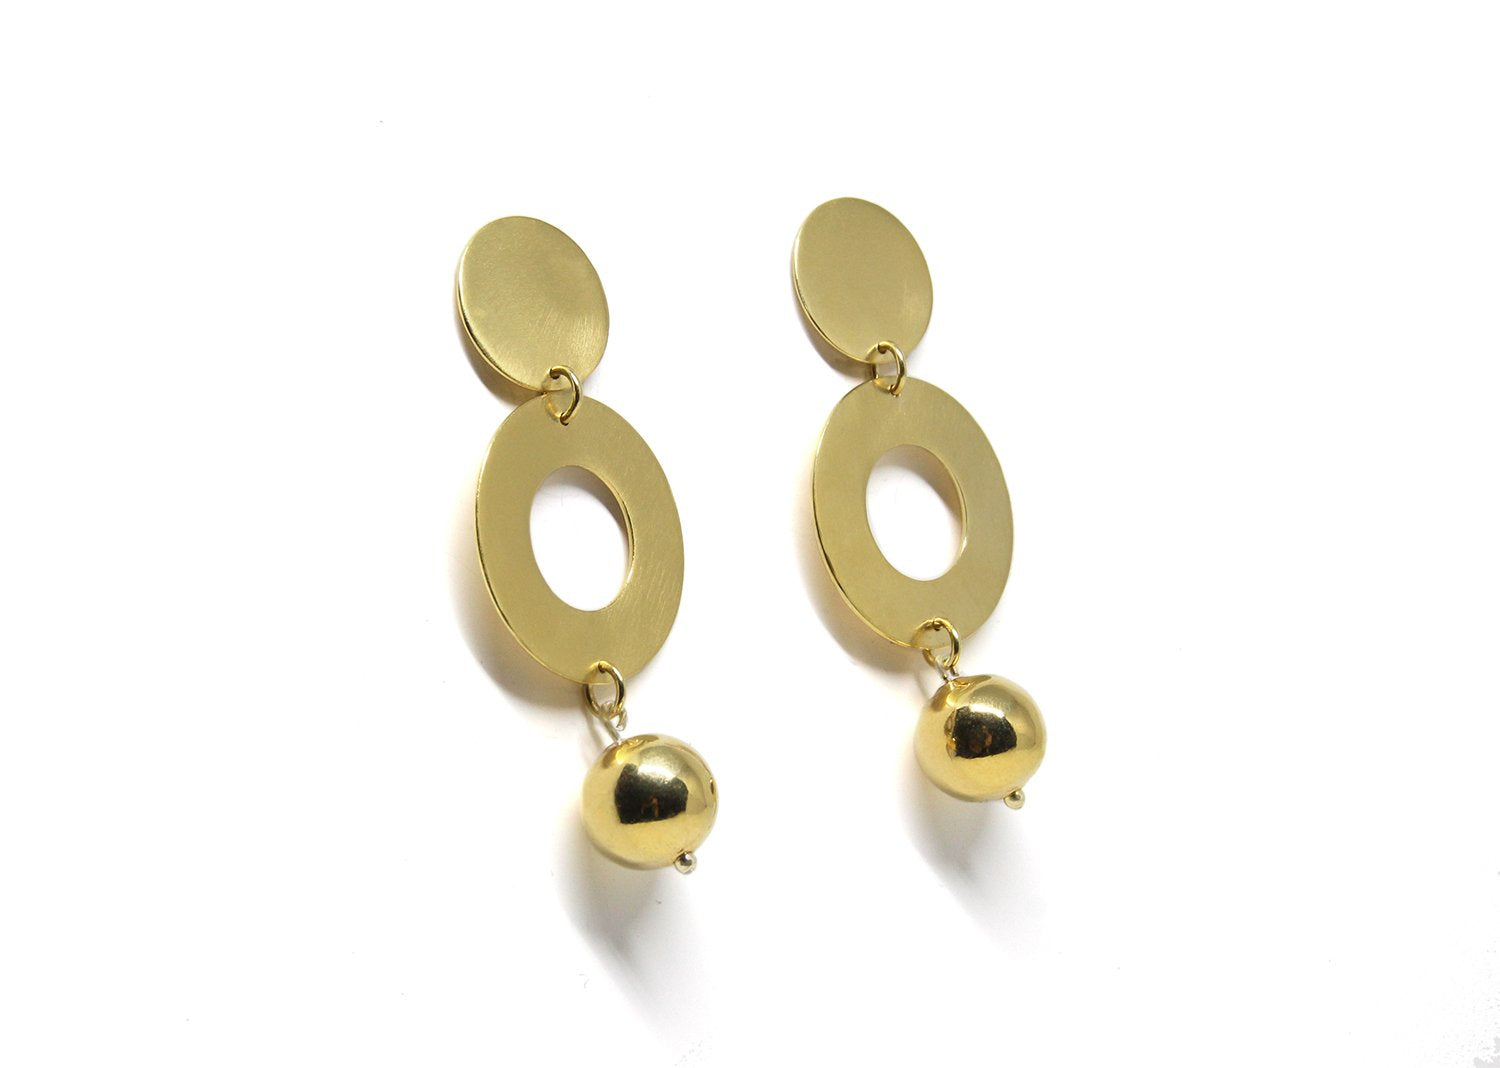 llayers jewelry dangly gold plated sphere earrings satellite bijoux boucles oreilles pendantes boule or